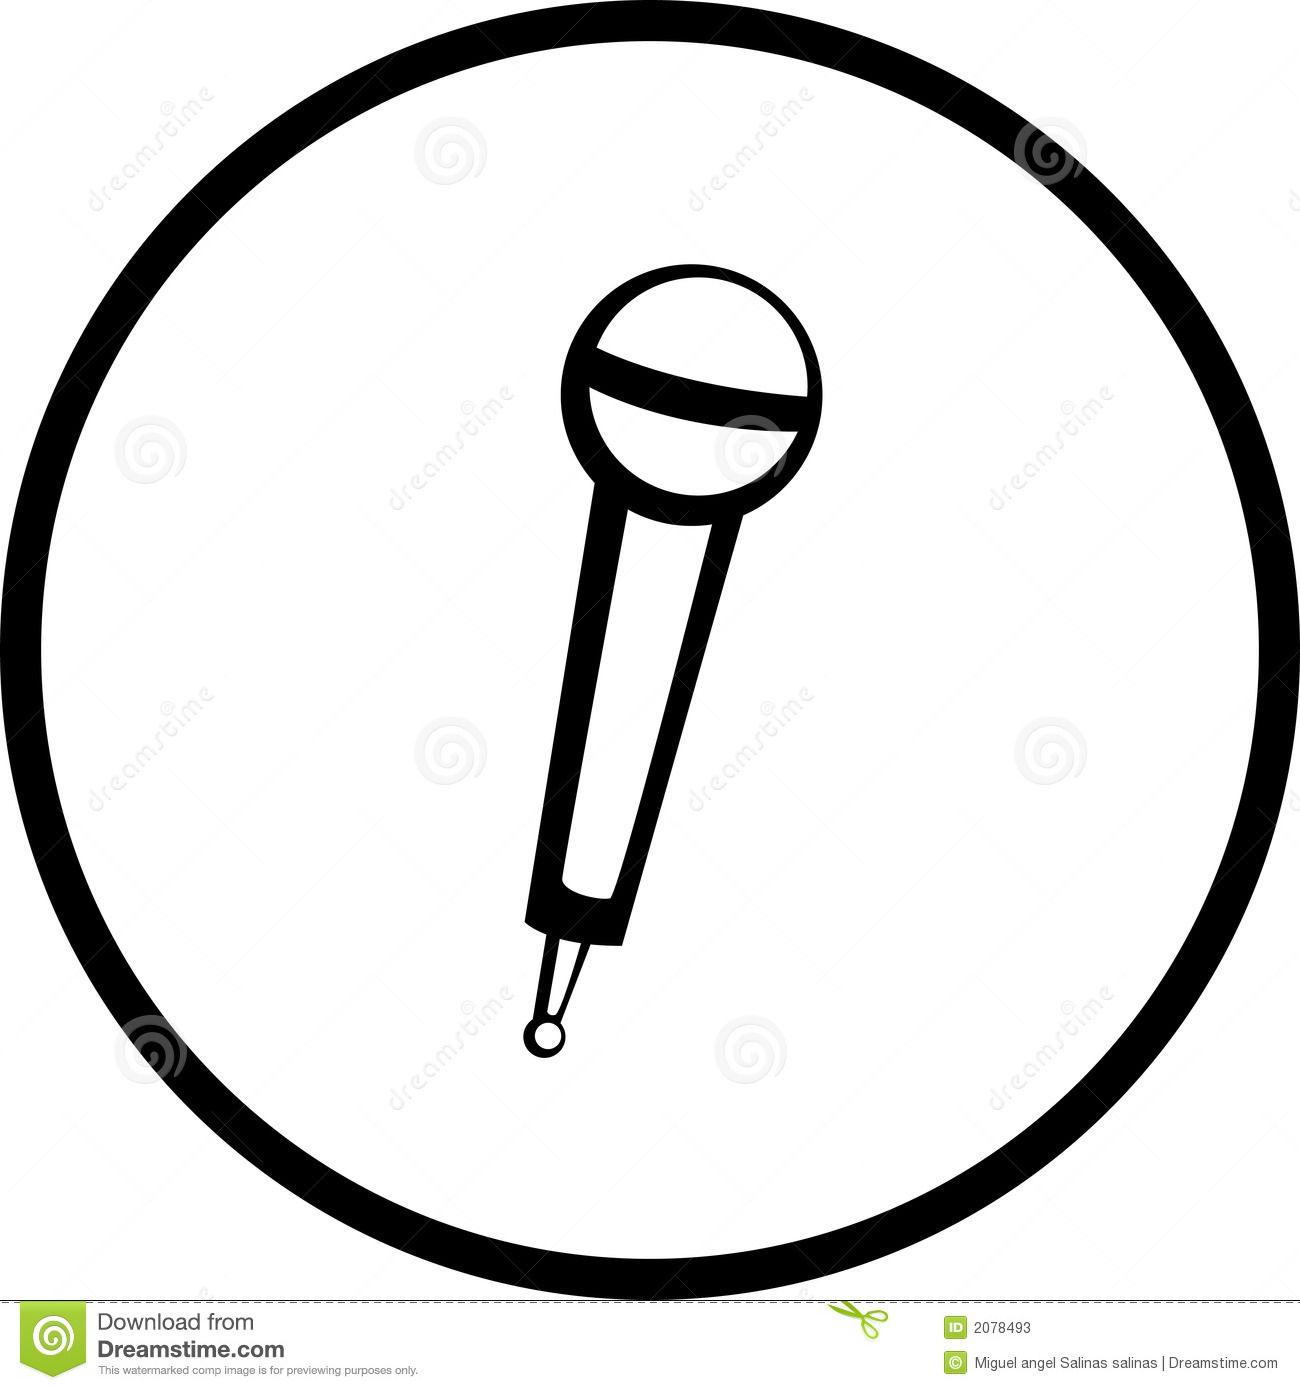 Microphone Clipart Black And White   Clipart Panda   Free Clipart